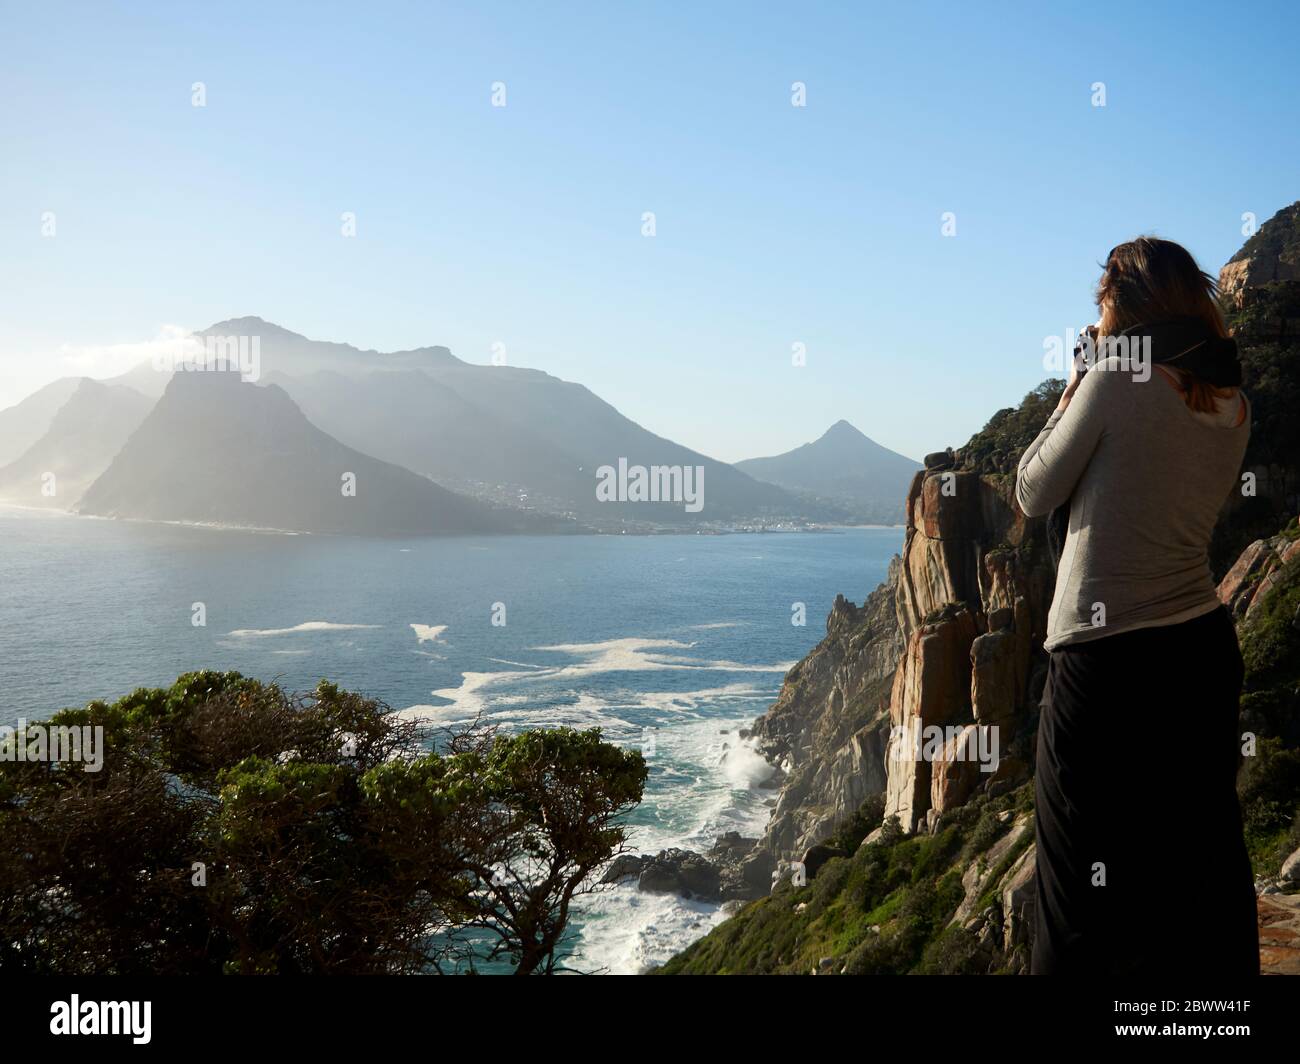 Woman taking pictures of a mountain and sea landscape, Chapman's Peak Drive, South Africa Stock Photo